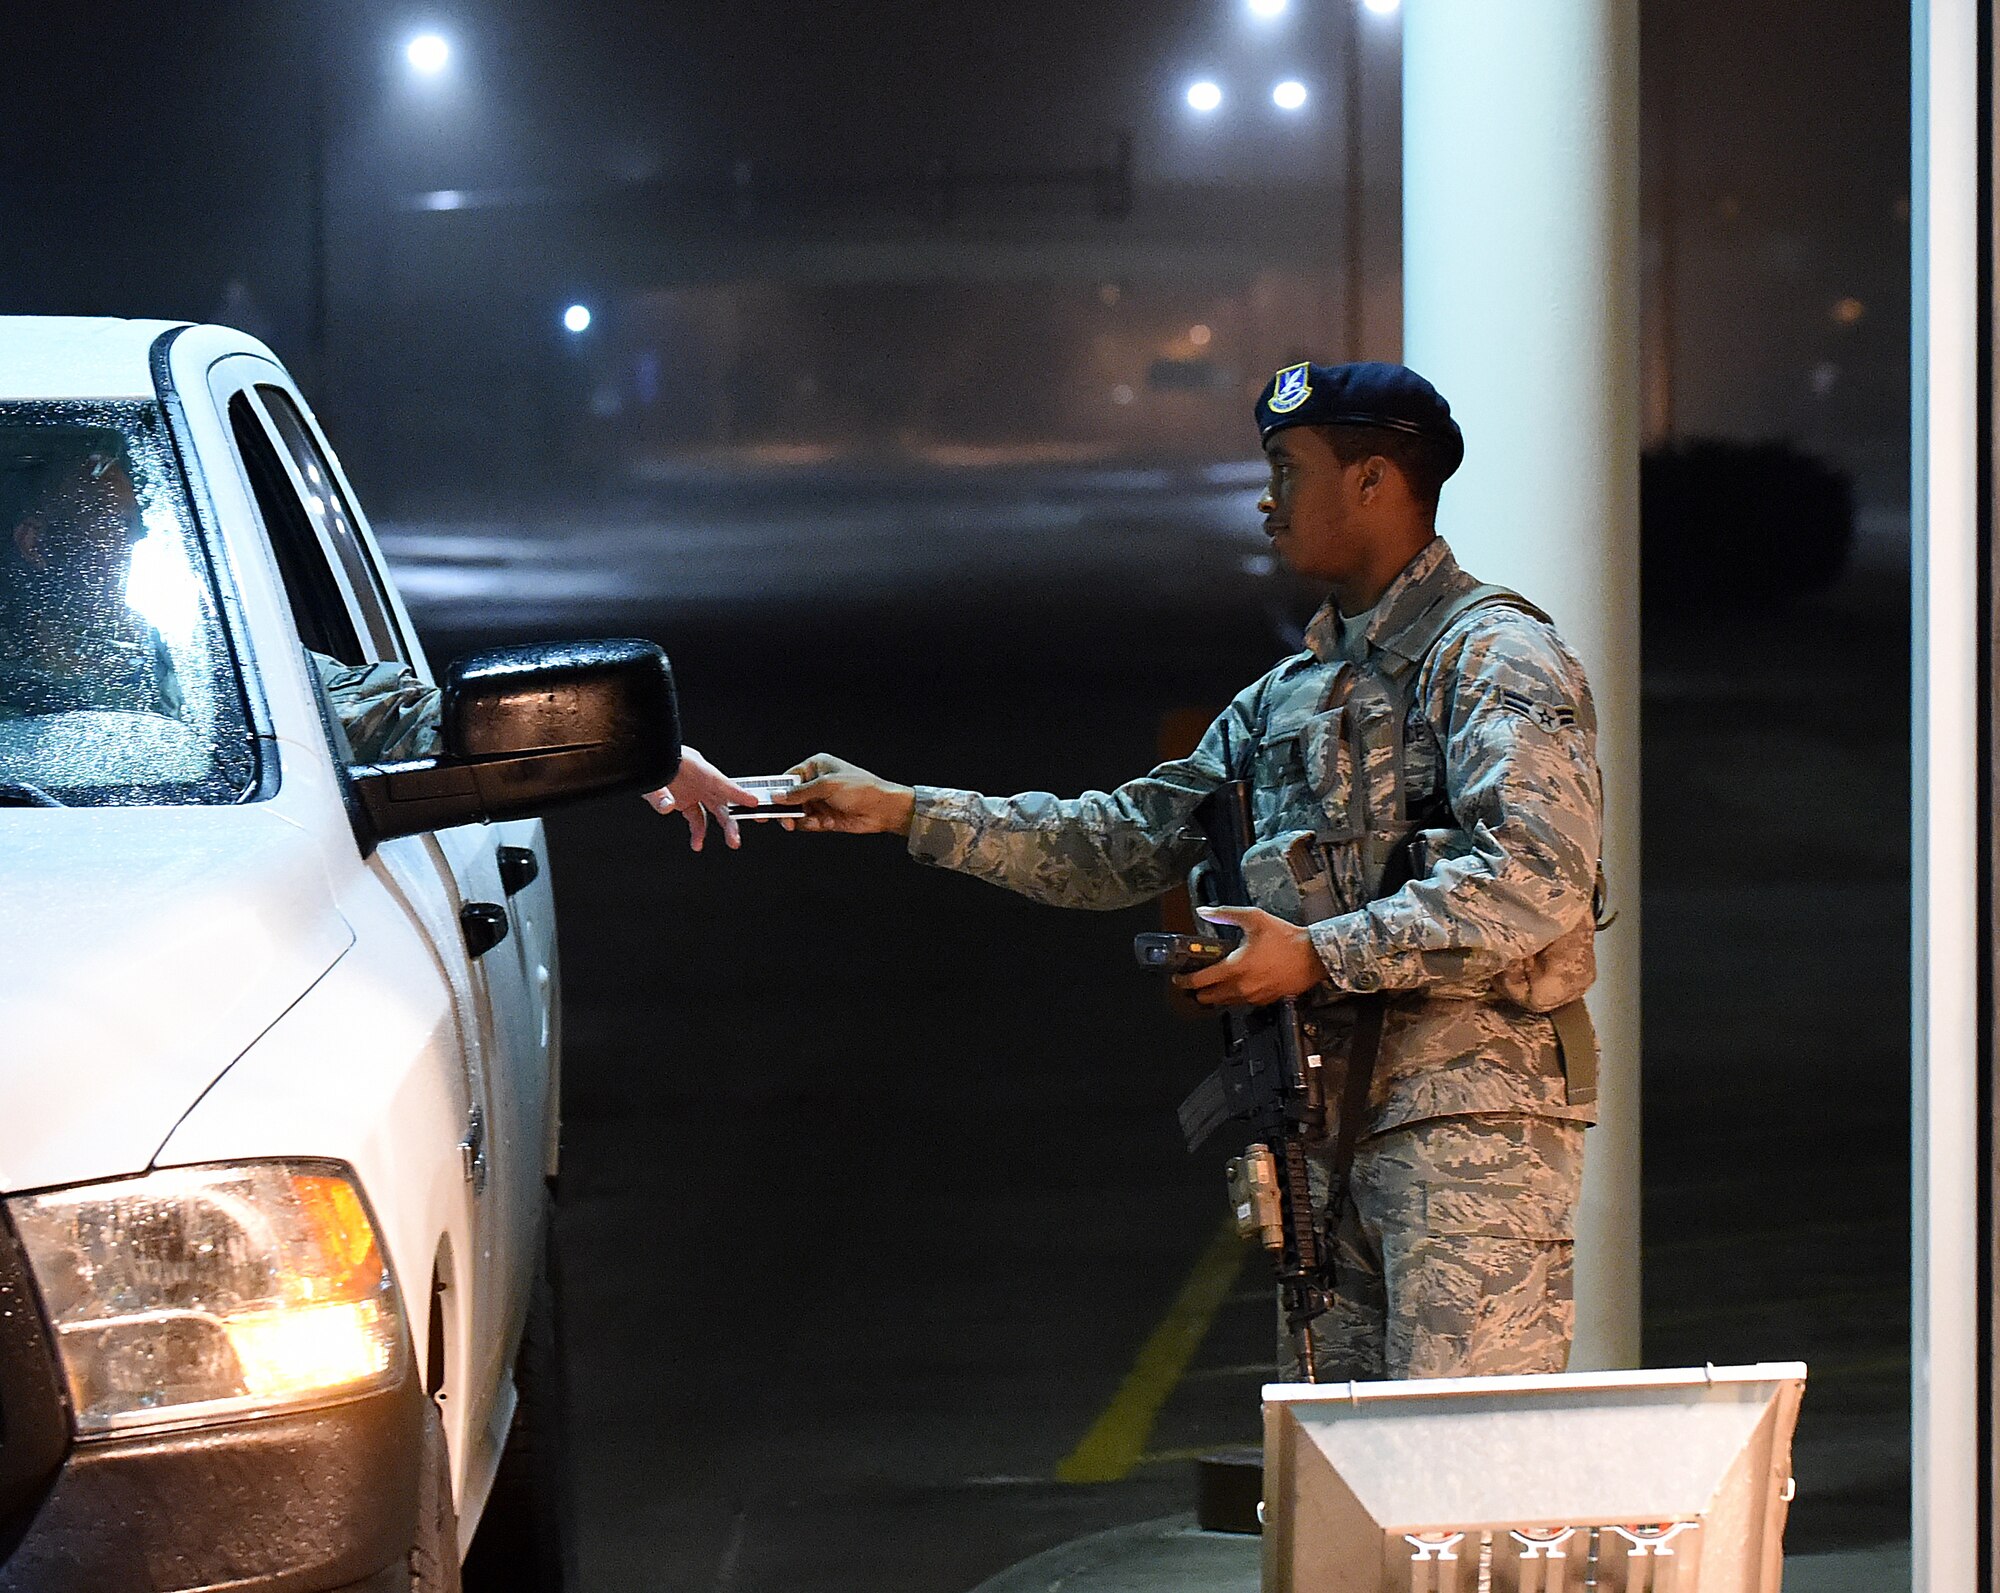 Airman 1st Class Bradley Hill, 90th Security Forces Squadron, checks the ID card of drivers at the front gate of F.E. Warren Air Force Base, Wyo., in the early-morning hours of April 8, 2015. Airmen work as entry controllers for 12-hour shifts starting the evening before at 6 p.m. (U.S. Air Force photo by R.J. Oriez)